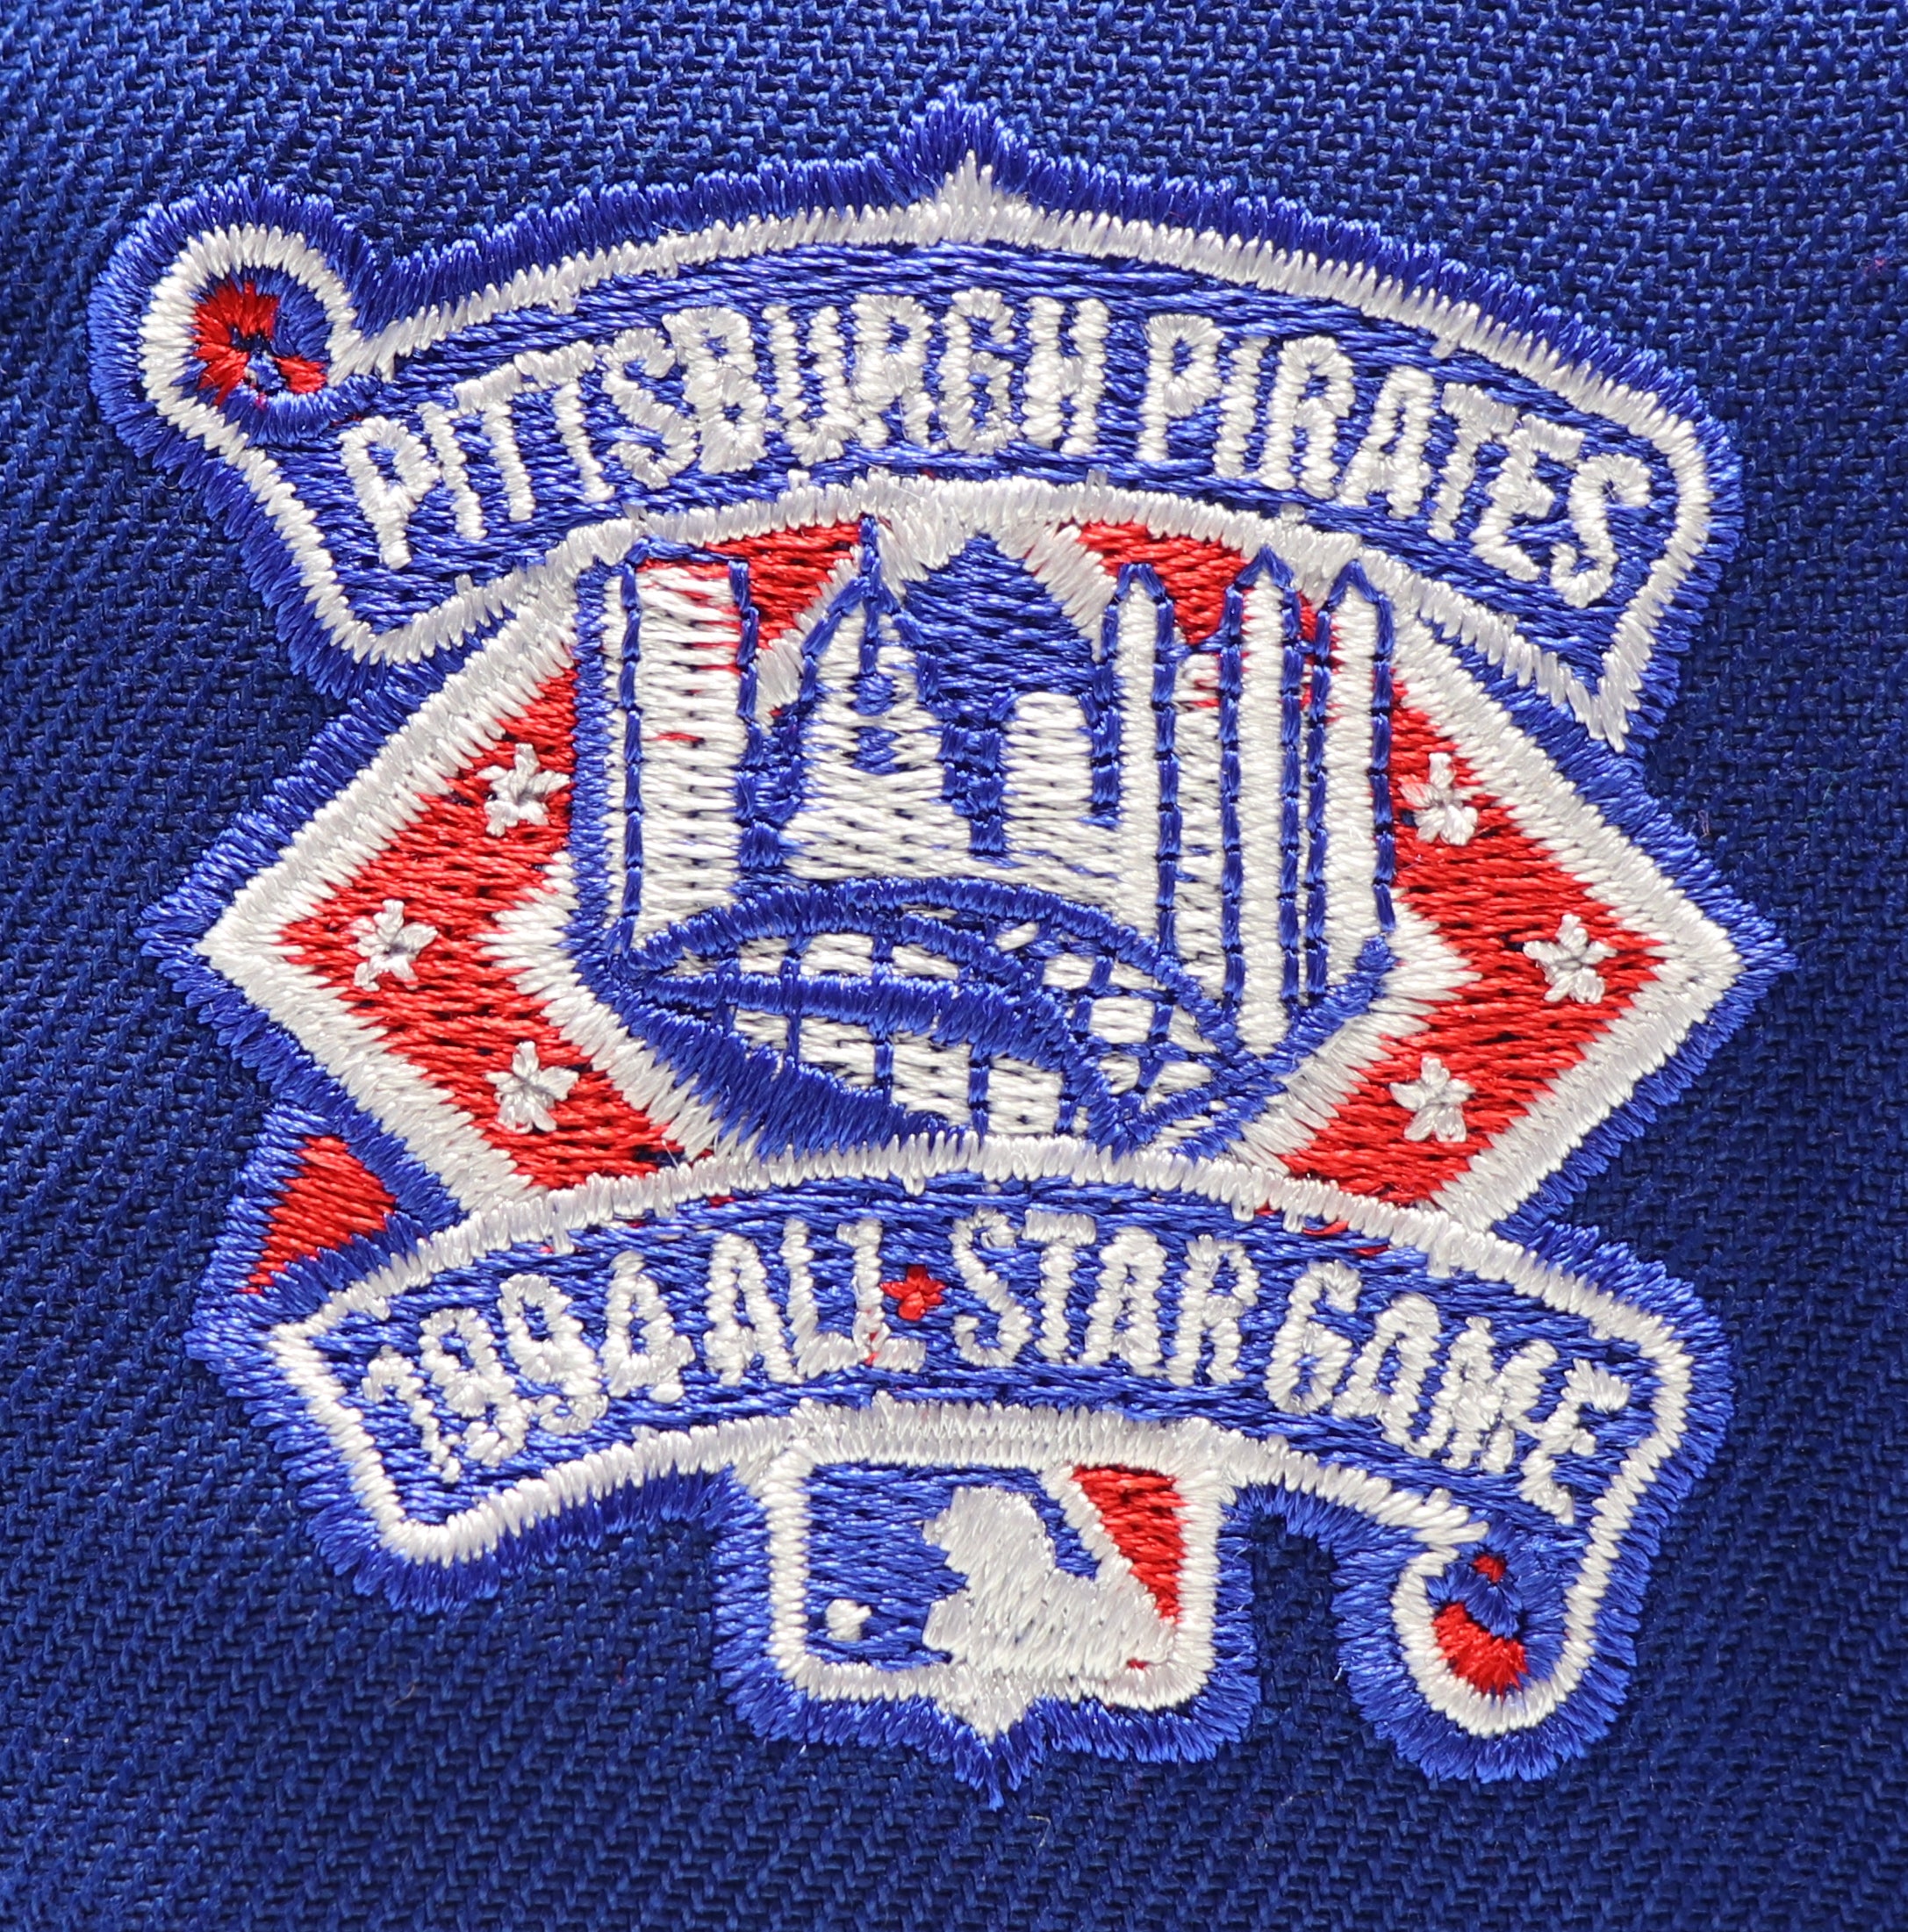 PITTSBURGH PIRATES (ROYAL) (1994 ALLSTARGAME) NEW ERA 59FIFTY FITTED (GREY UNDER VISOR) (W)